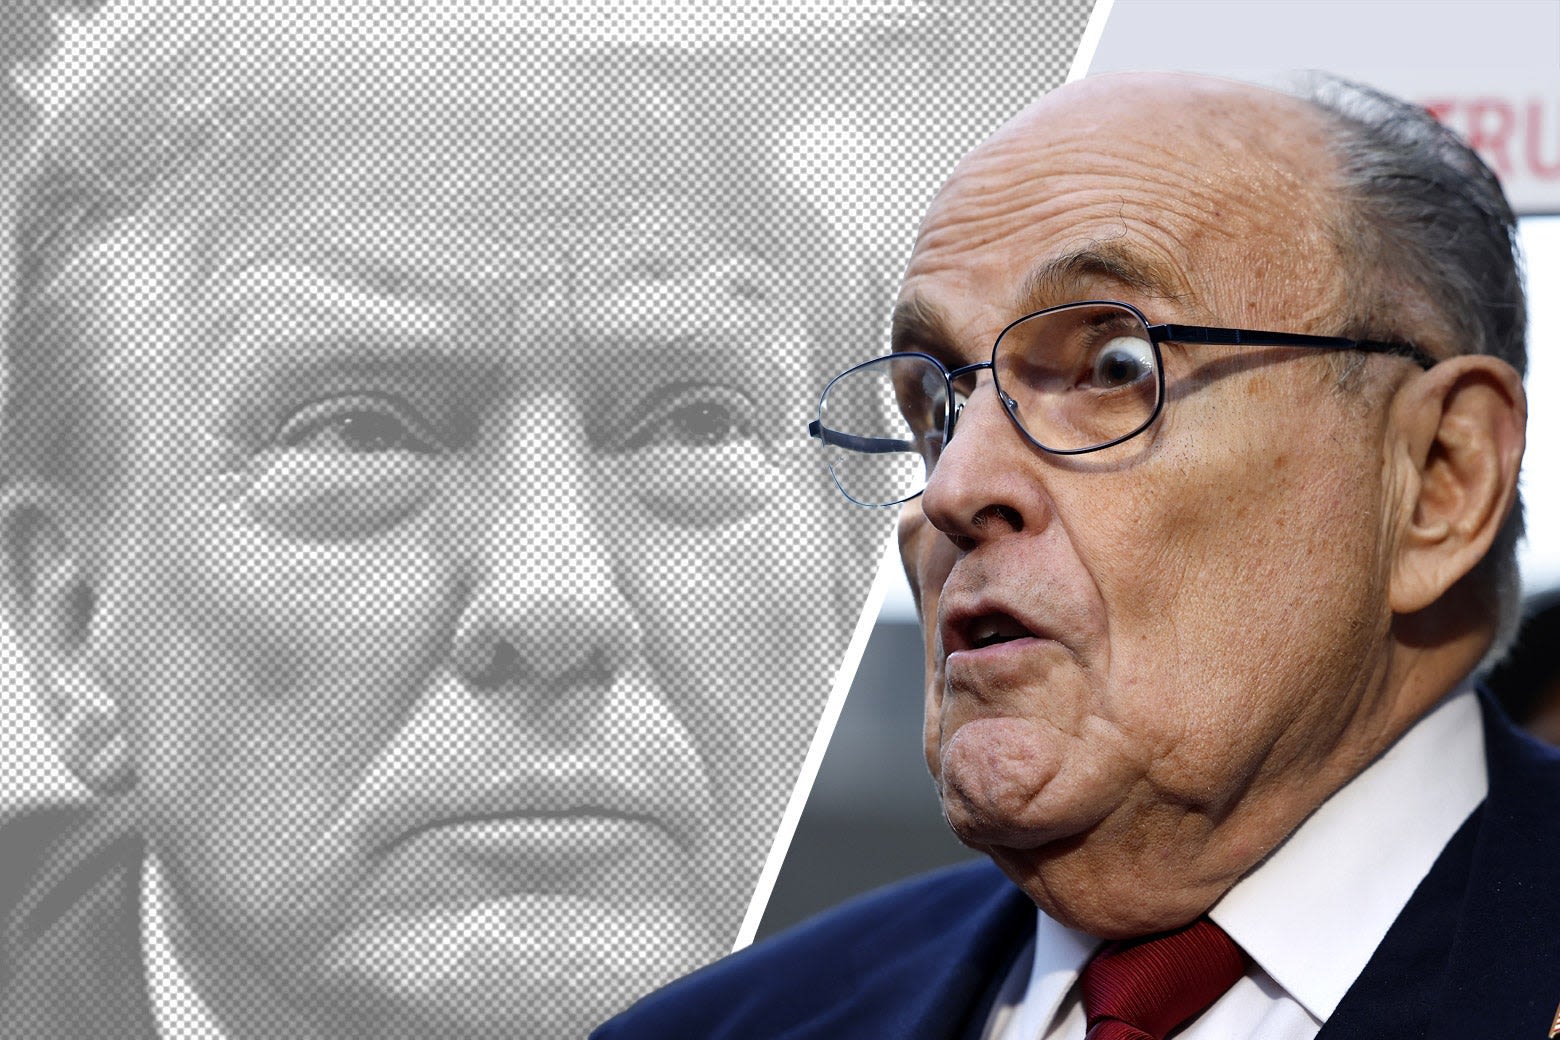 Rudy Giuliani Gets Quite the Birthday Present!